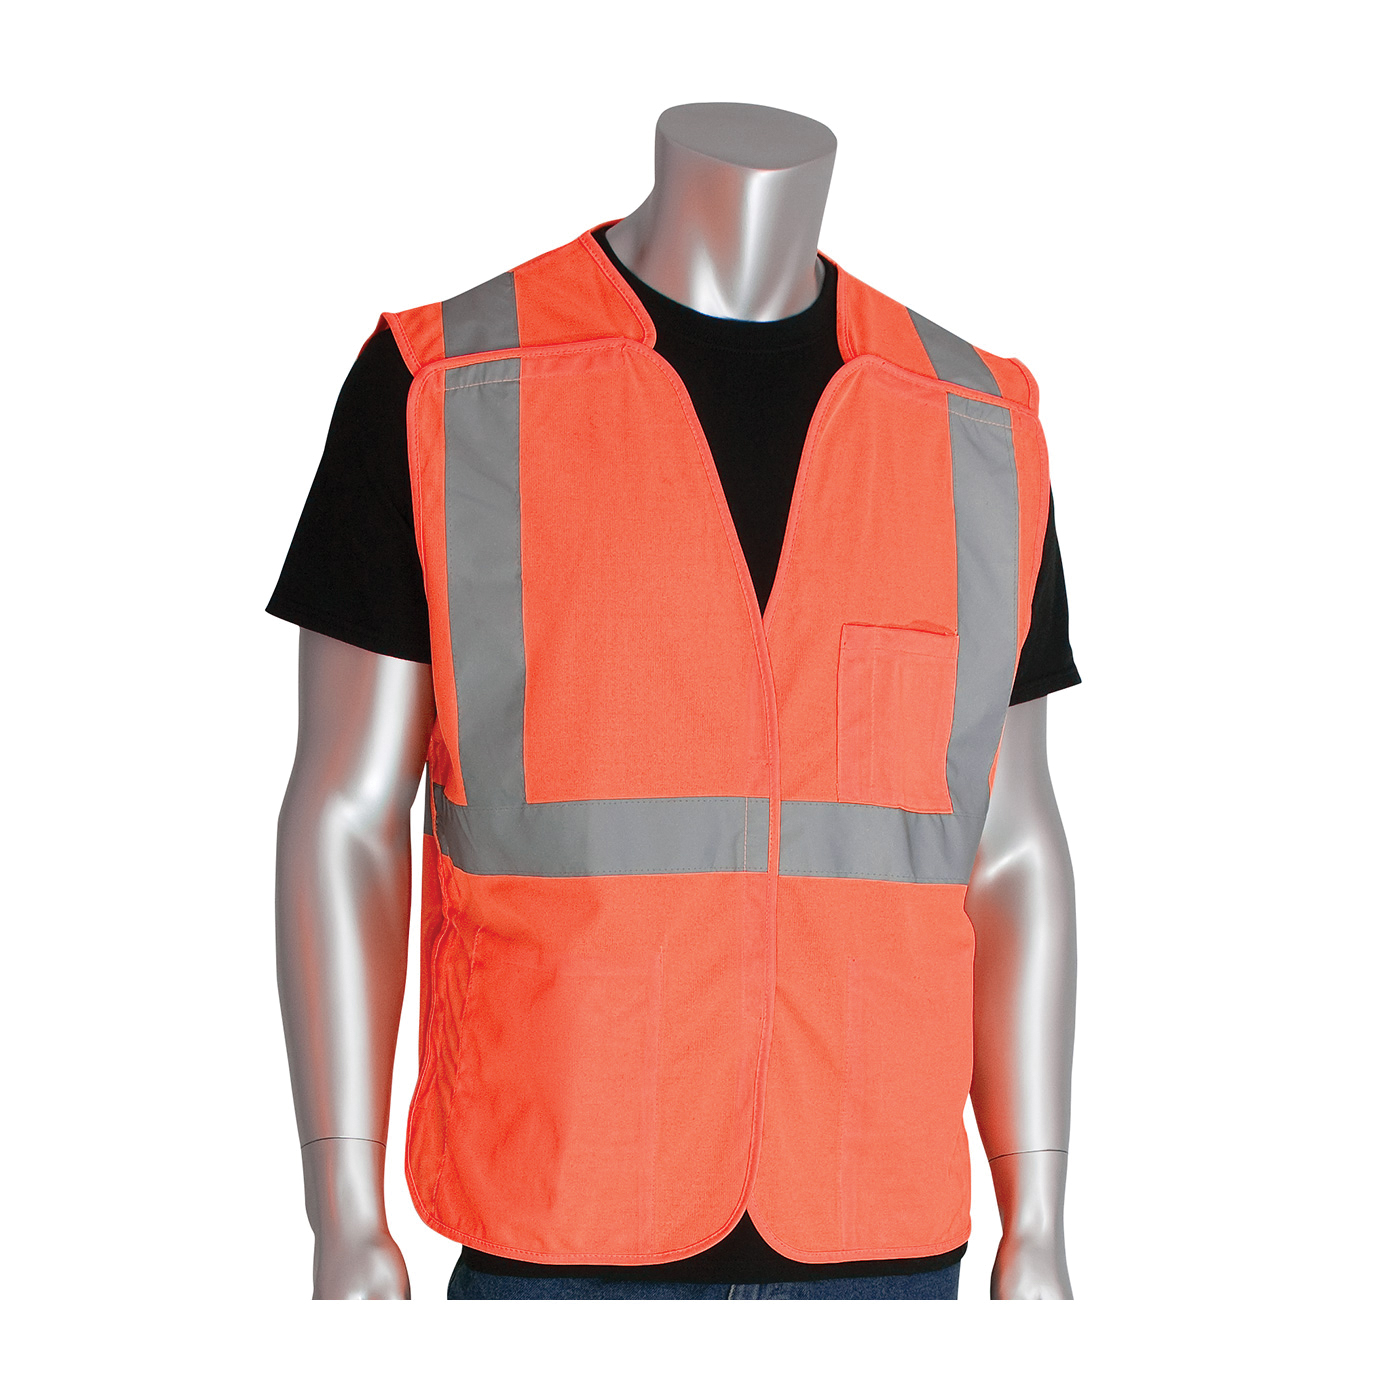 PIP® 302-5PVOR-4X Safety Vest, 4XL, Hi-Viz Orange, Polyester, Hook and Loop Closure, 3 Pockets, ANSI Class: Class 2, Specifications Met: ANSI 107 Type R